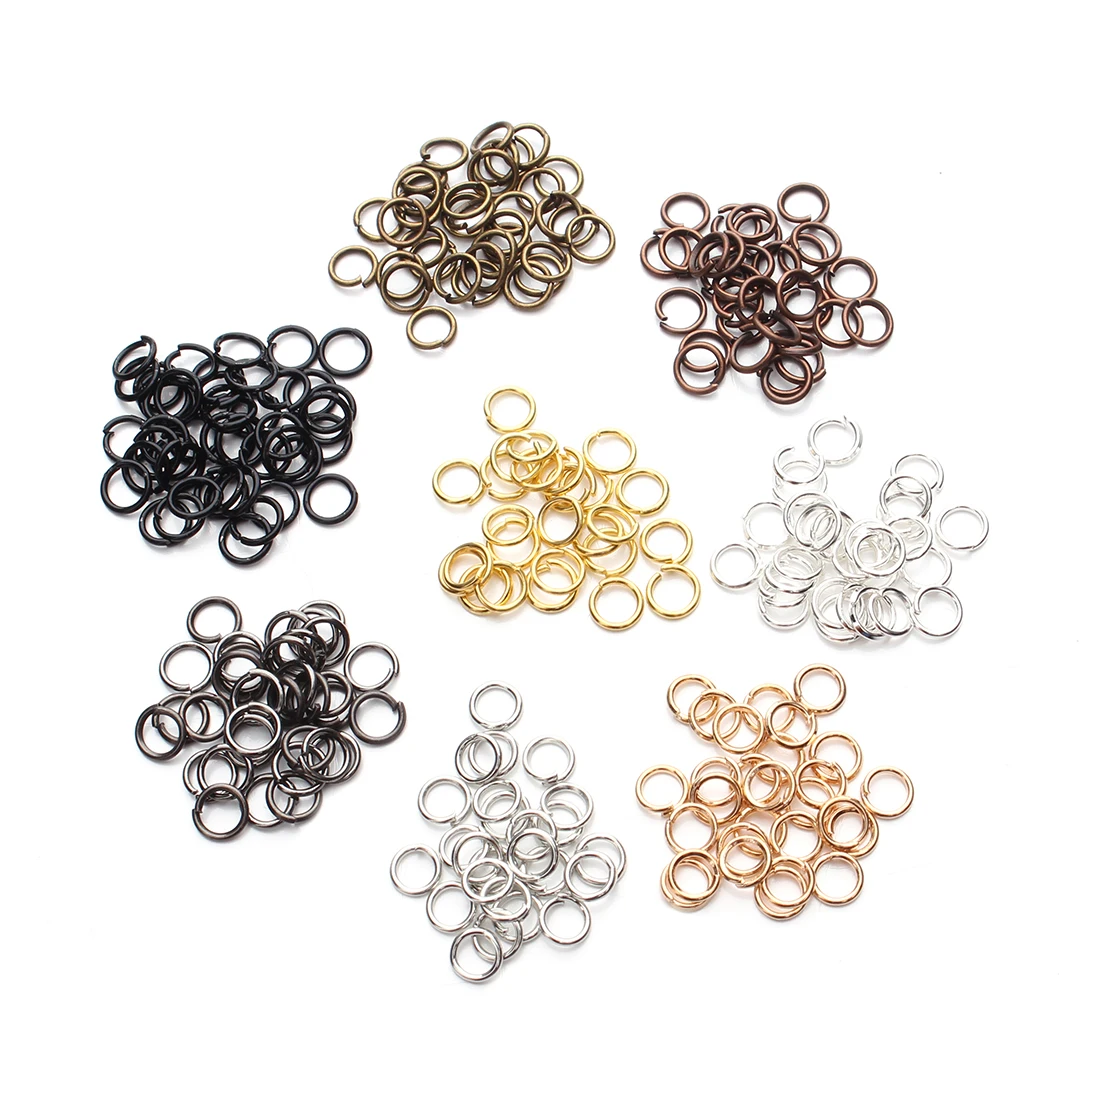 

100-200pcs/lot 4 5 6 8 10 mm Jump Rings Split Rings Connectors For Diy Jewelry Finding Making Accessories Wholesale Supplies, Gold/silver/rhodium/gun-metal/kc-gold/brass